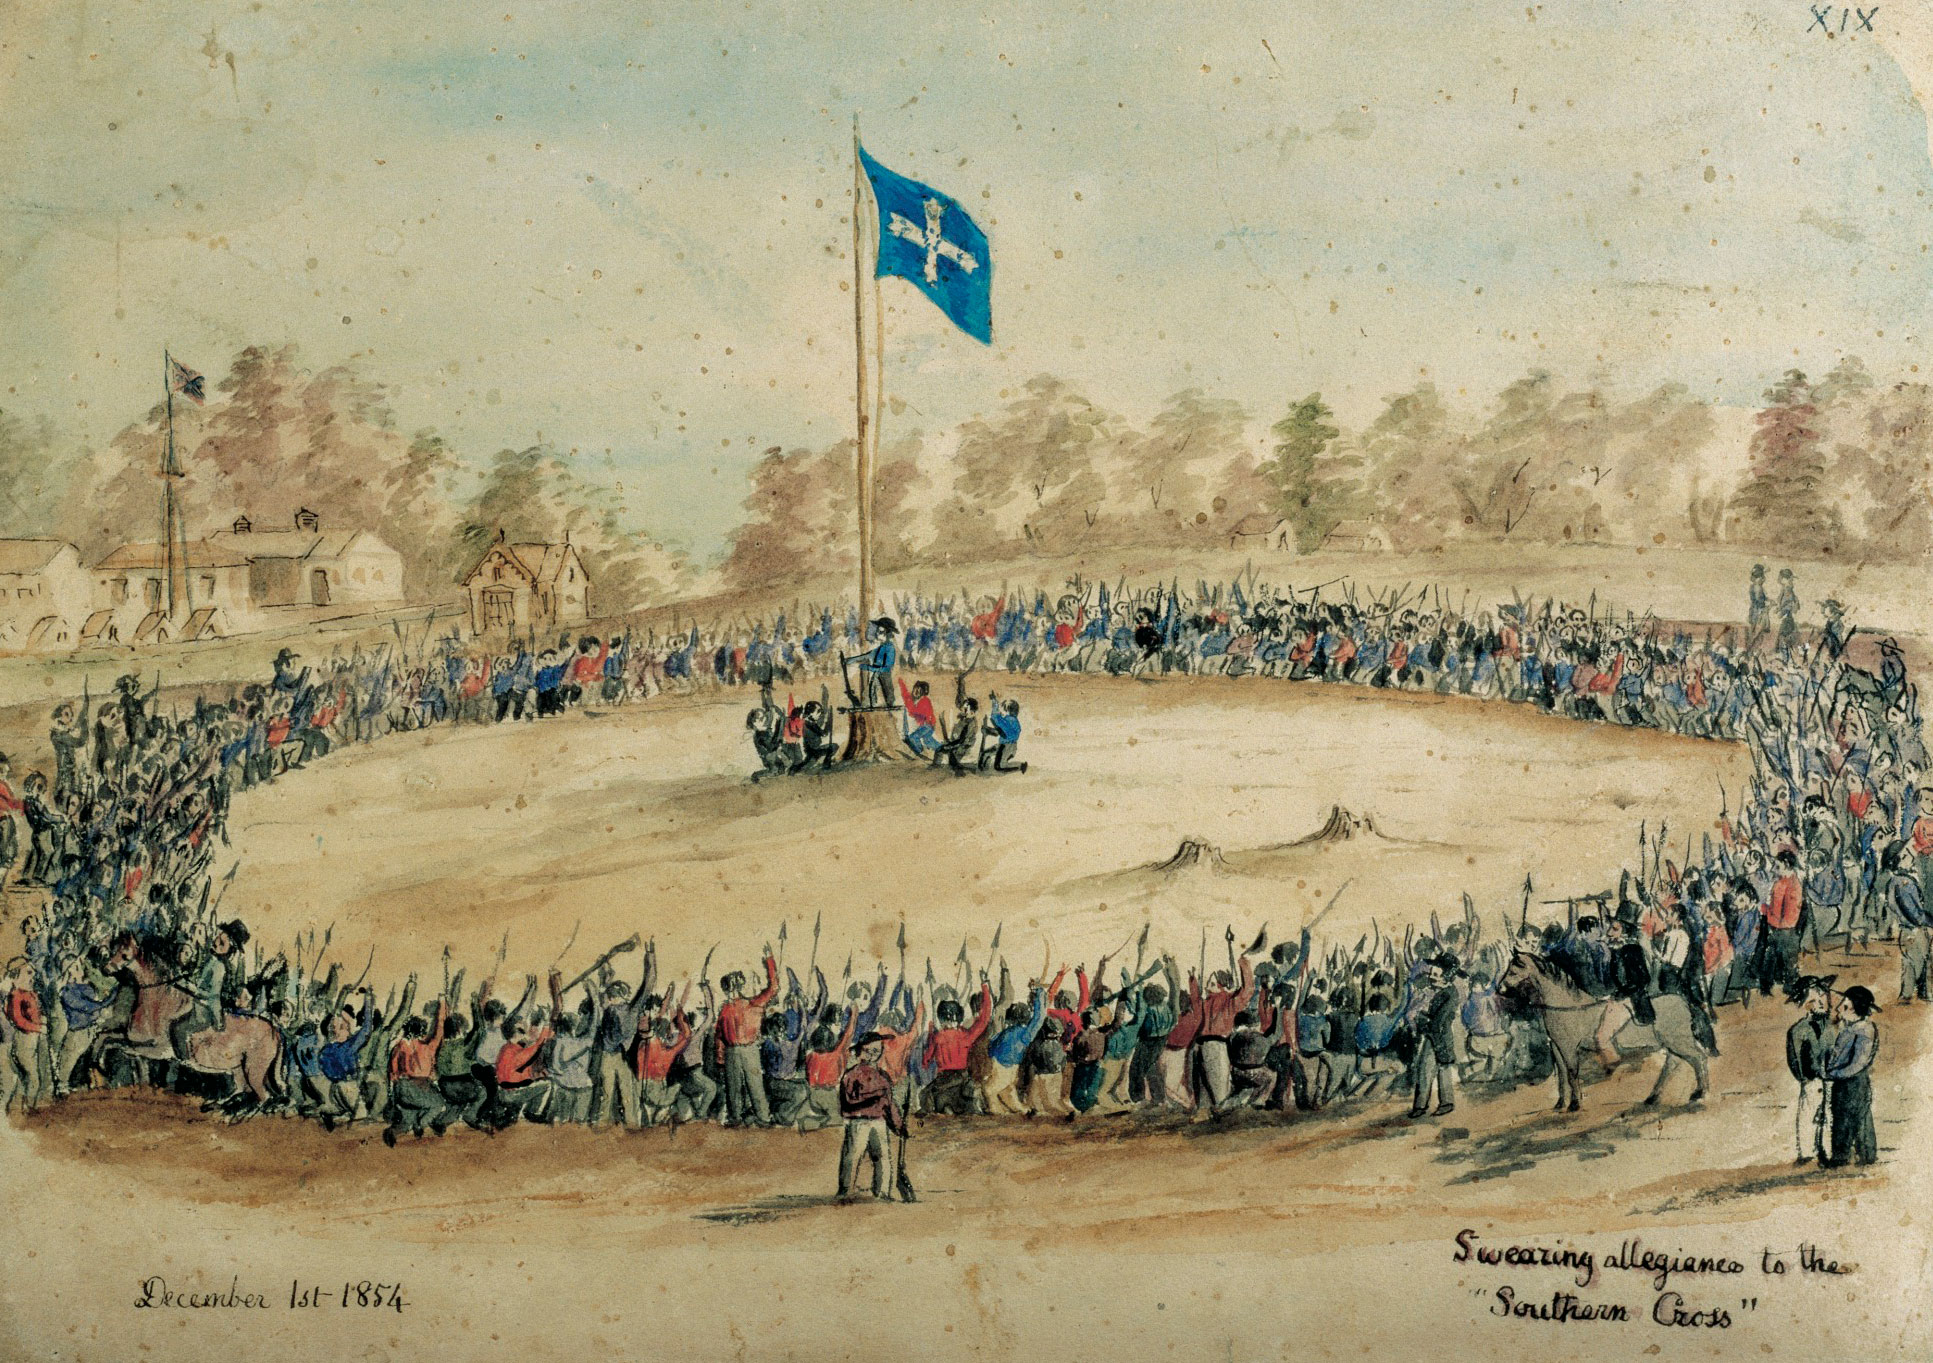 <p><em>Swearing Allegiance to the Southern Cross</em>, 1 December 1854, watercolour by Charles A Doudiet</p>
